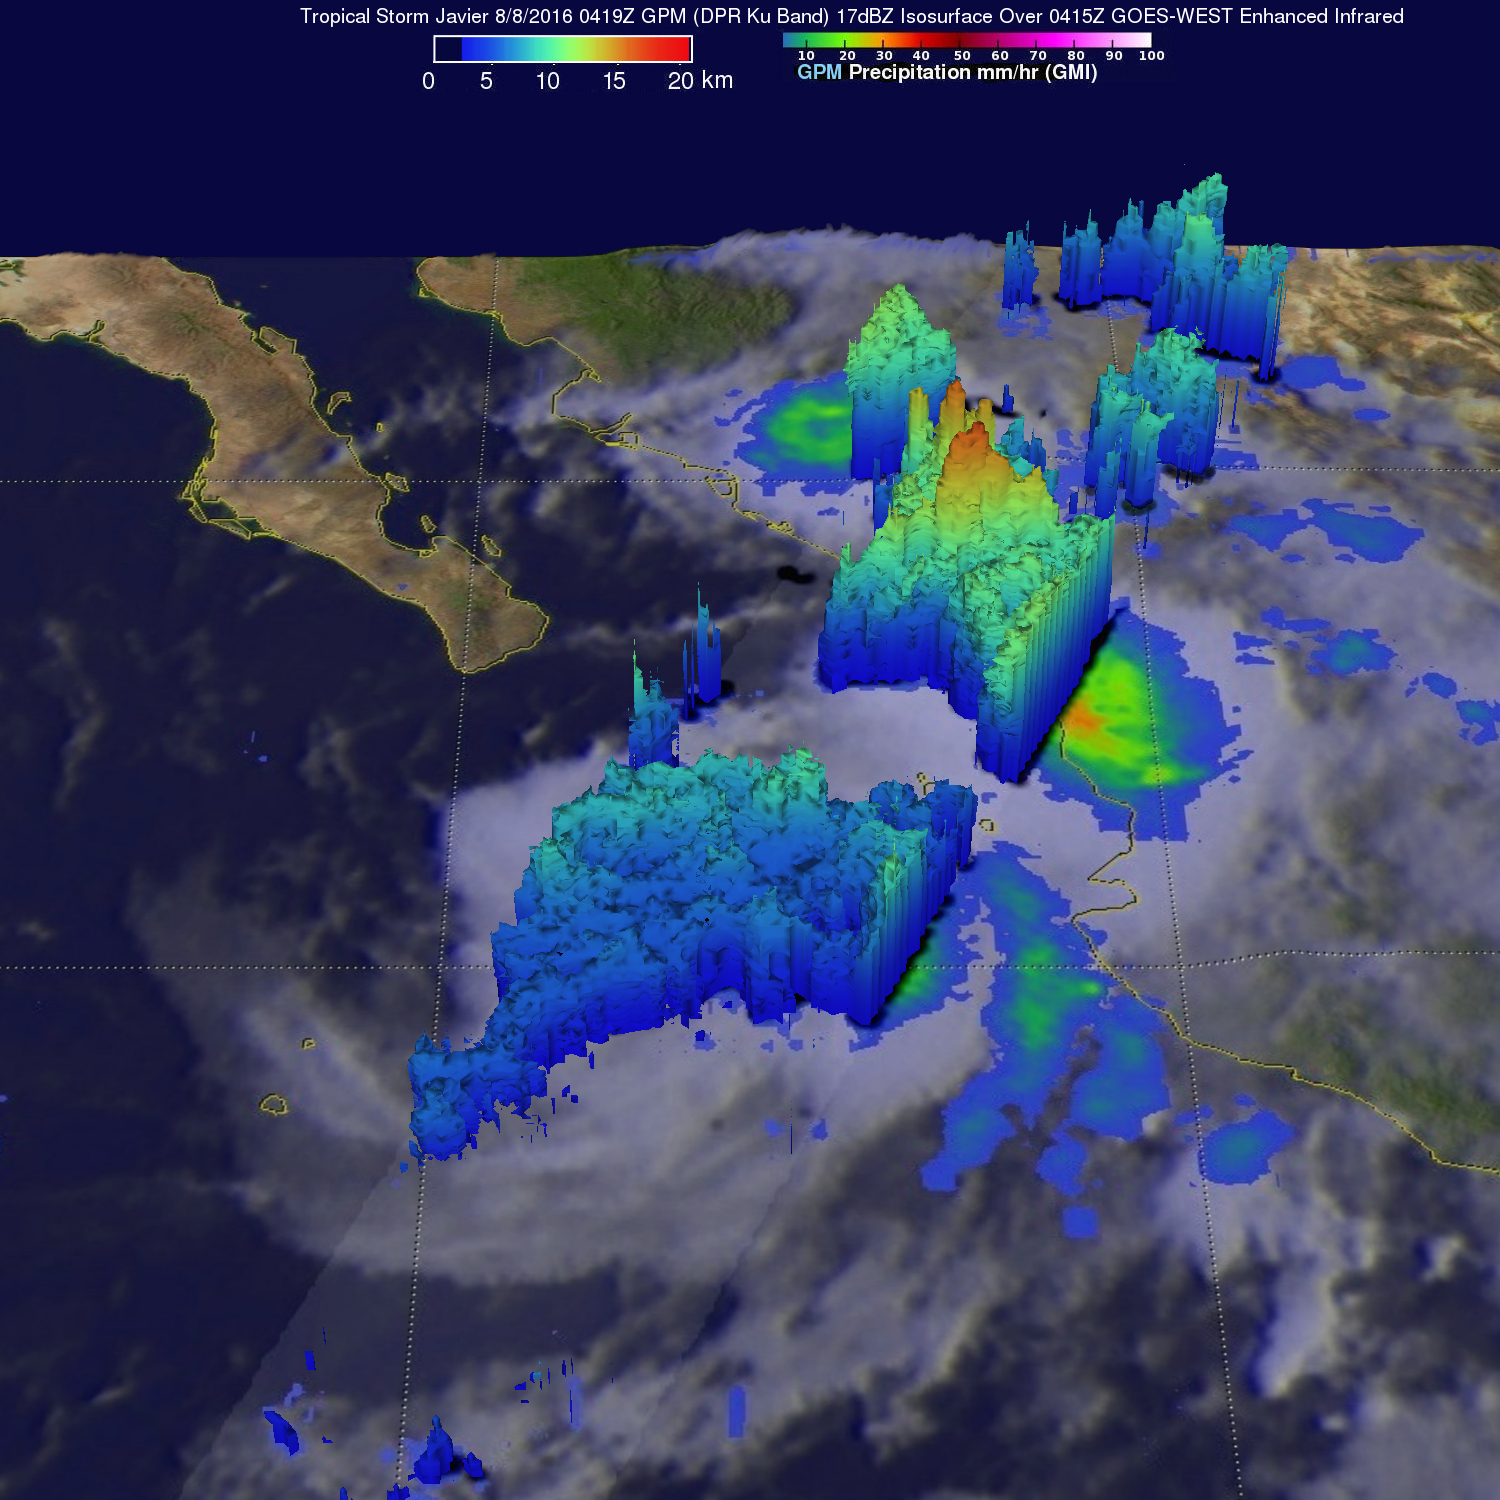 GPM measurement of rainfall in Tropical Storm Javier